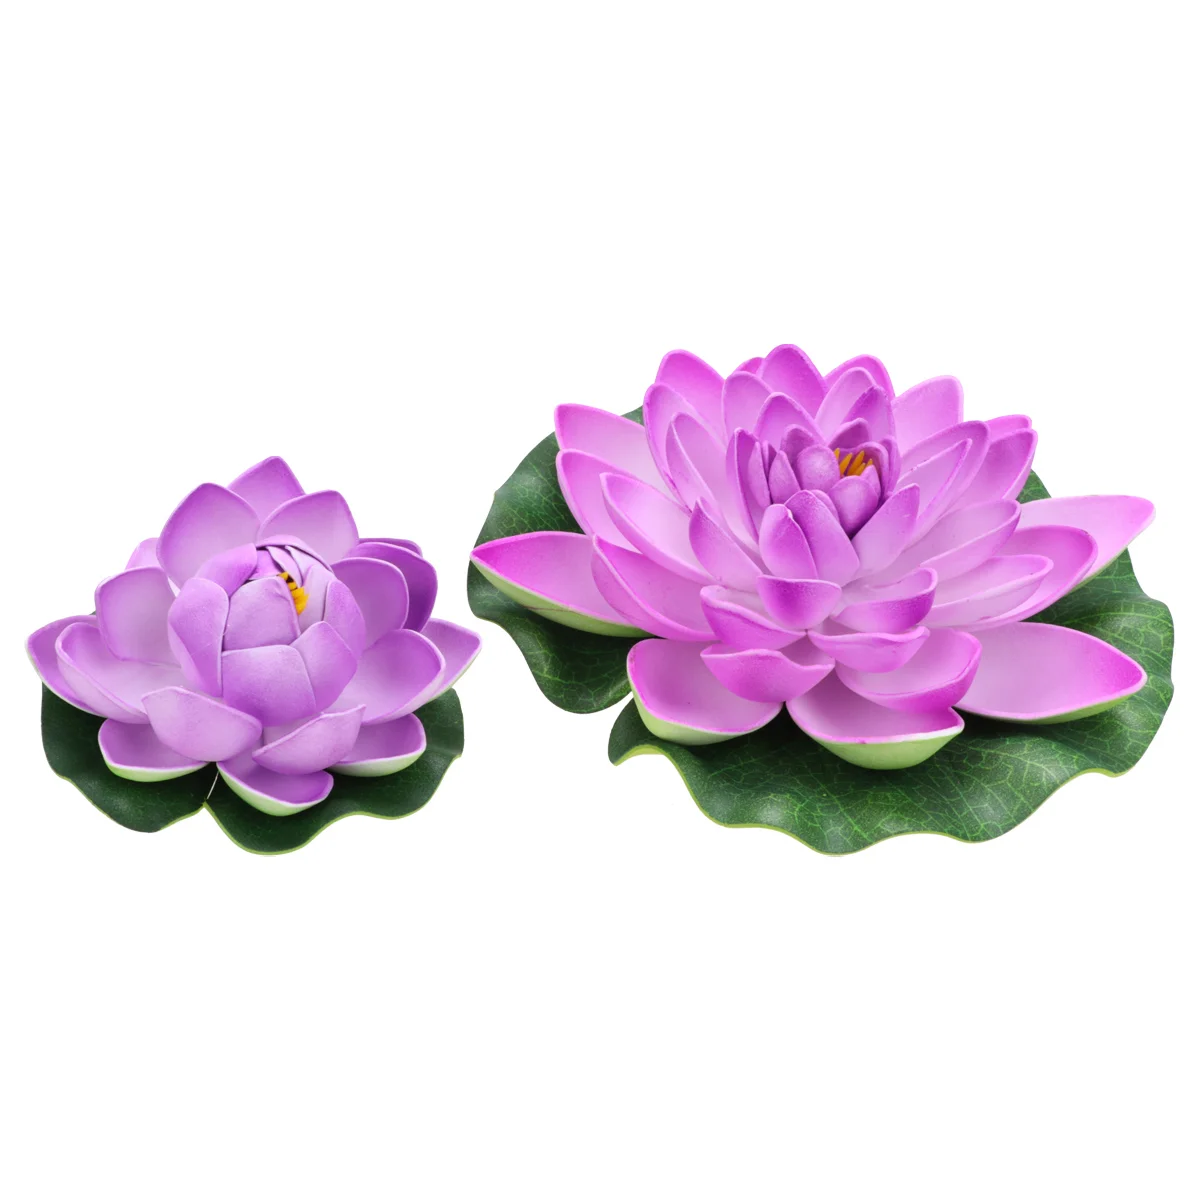 

Floating Flowers Lily Pads Water Pond Pool Realistic Decor Artificial Foam Lilies Fake Pad Flower Ornaments Leaves Lifelike